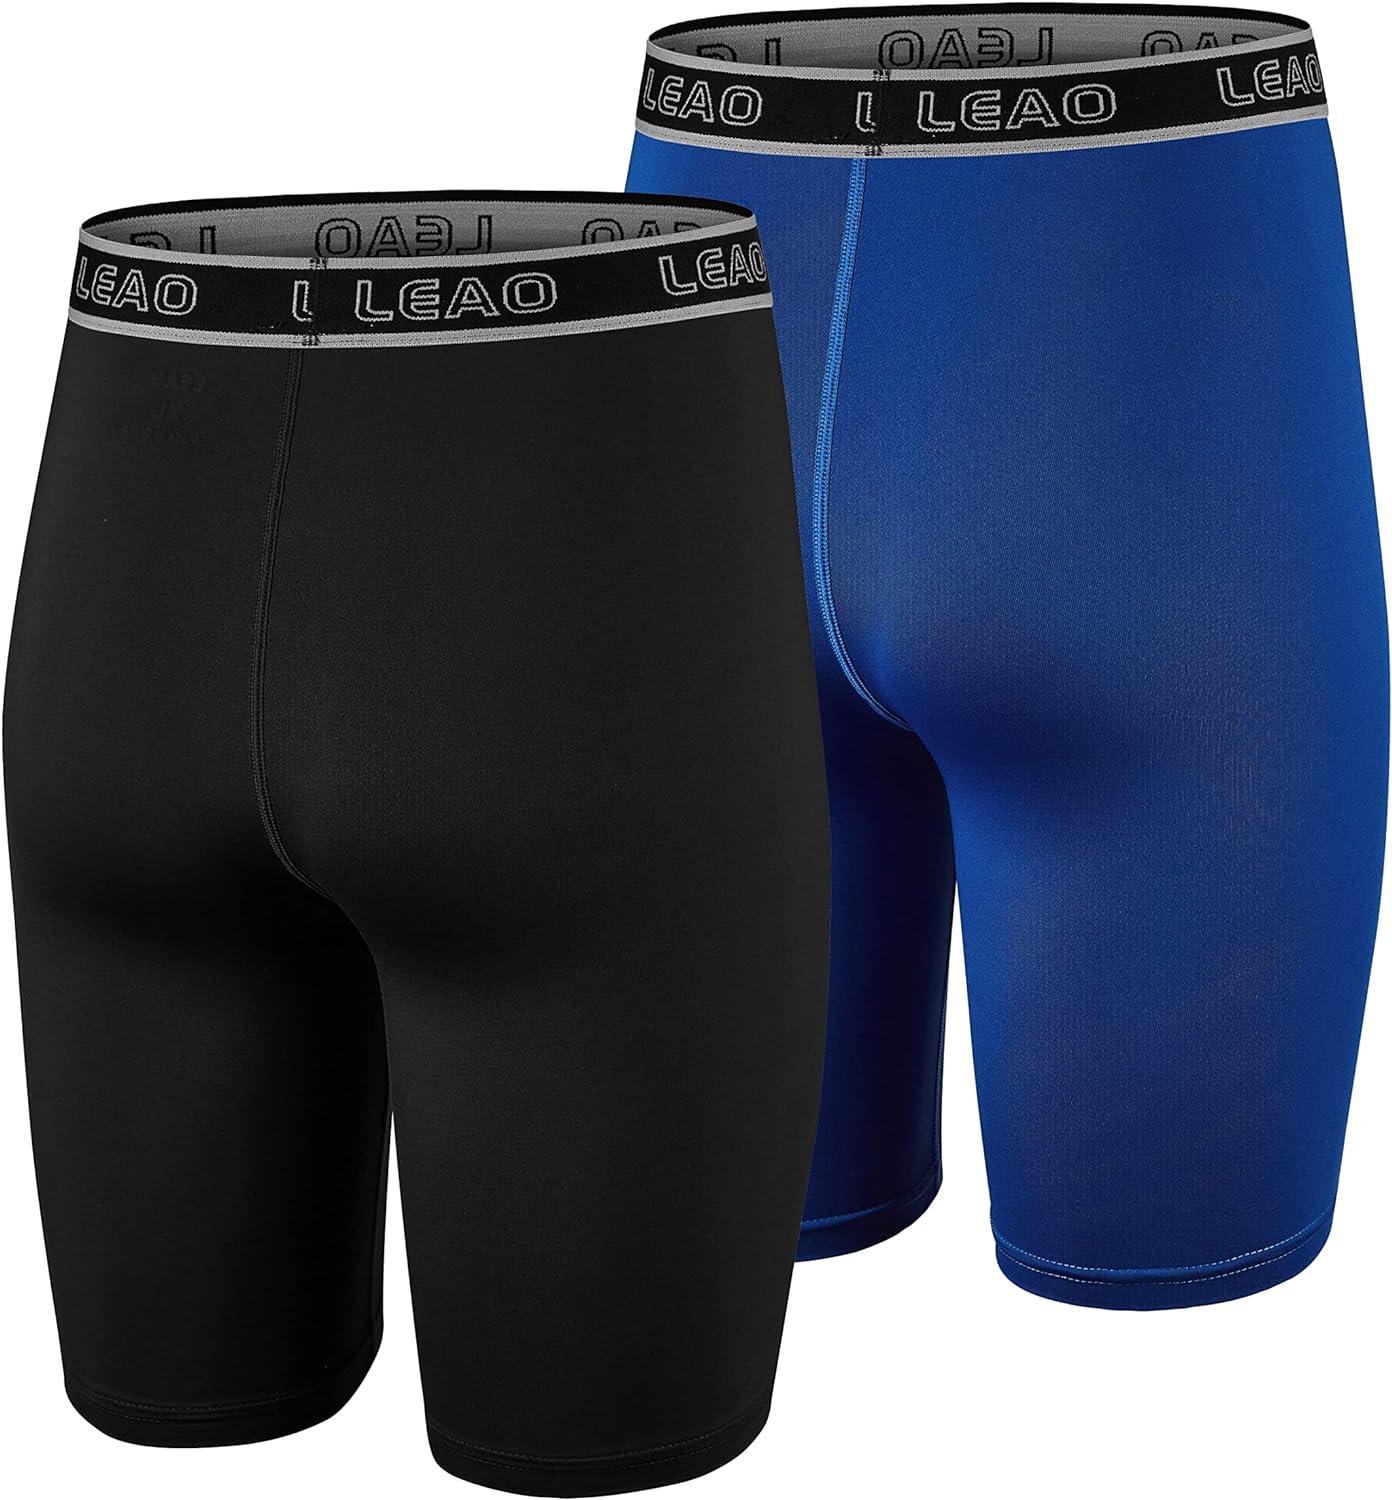 LEAO Youth Boys Compression Shorts 2-pack Performance Athletic Underwear  Sports Boxer Briefs Black/Royal Blue Large